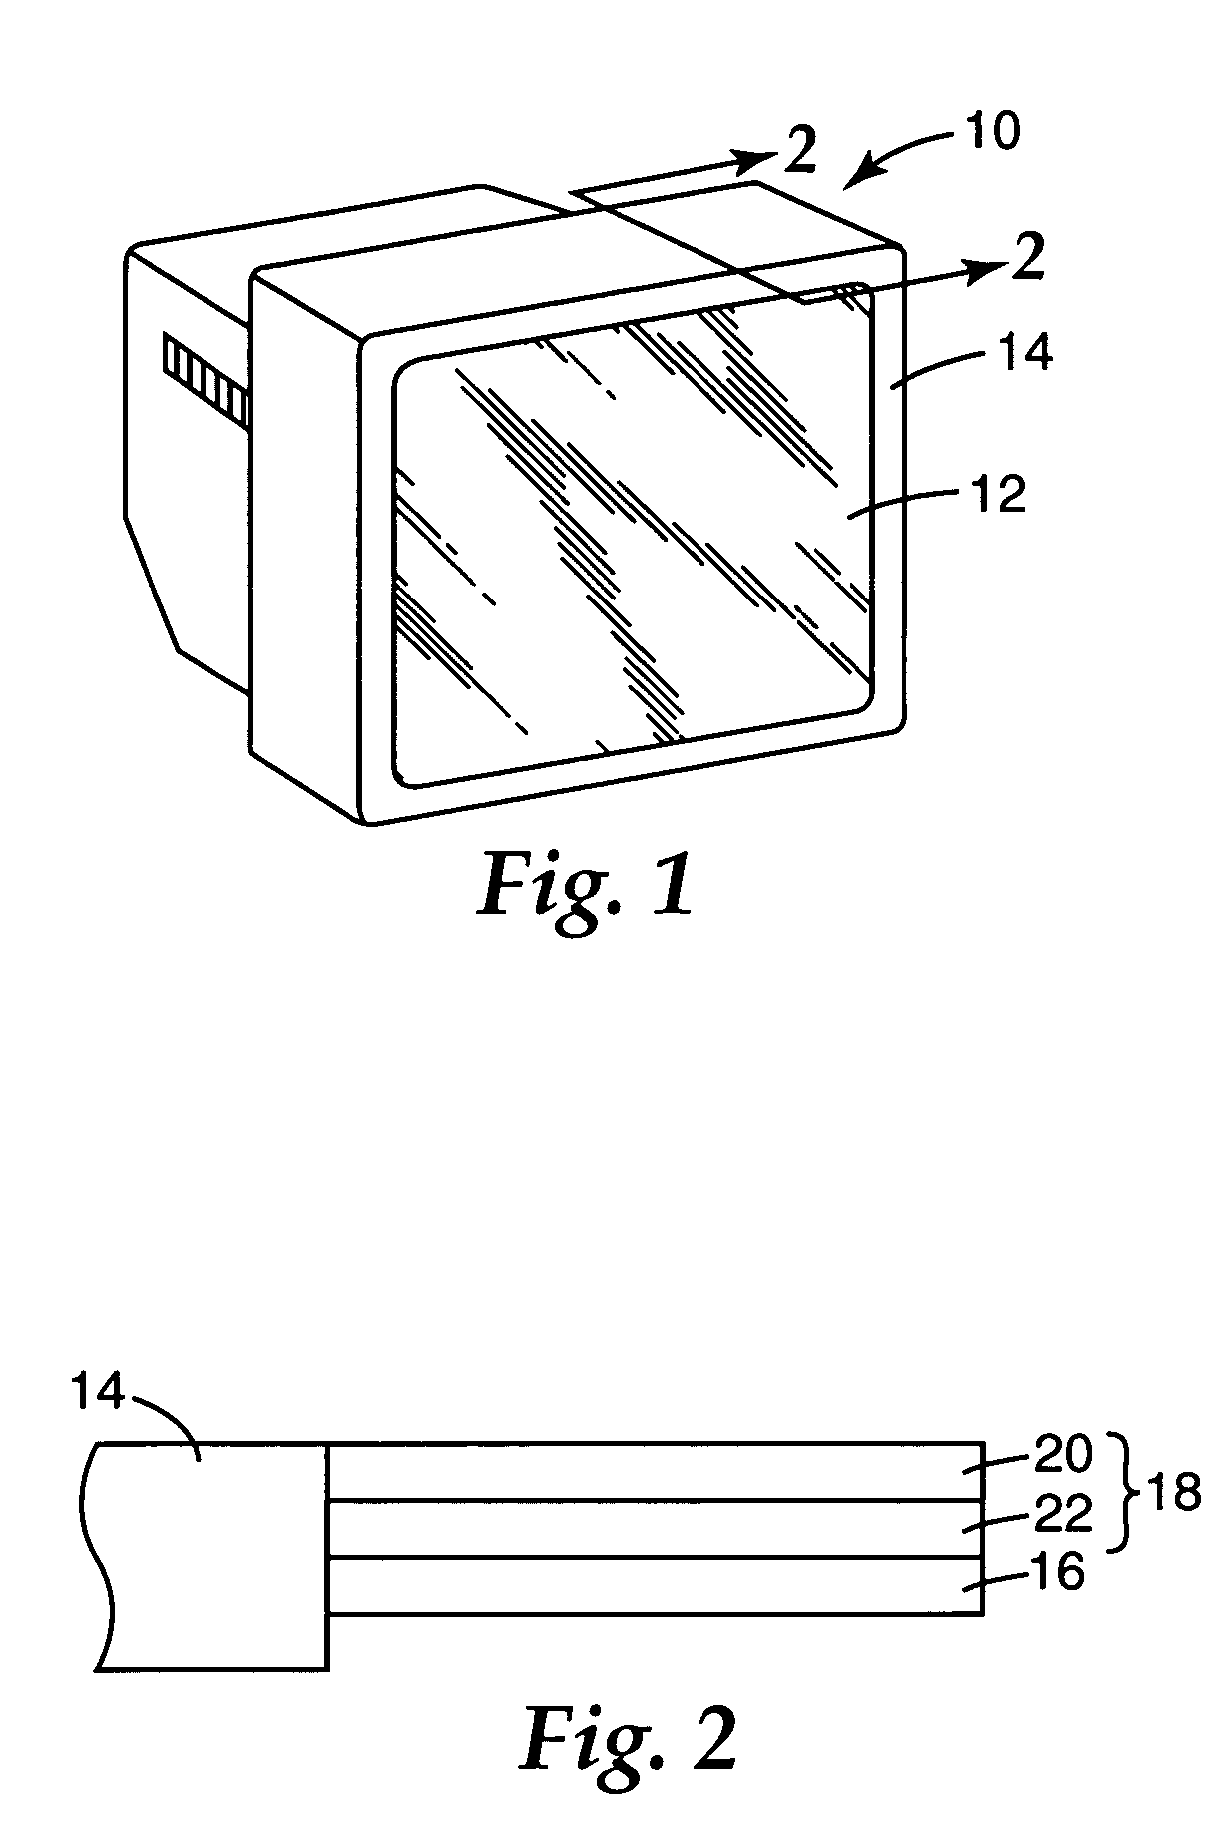 Low refractive index fluoropolymer compositions having improved coating and durability properties